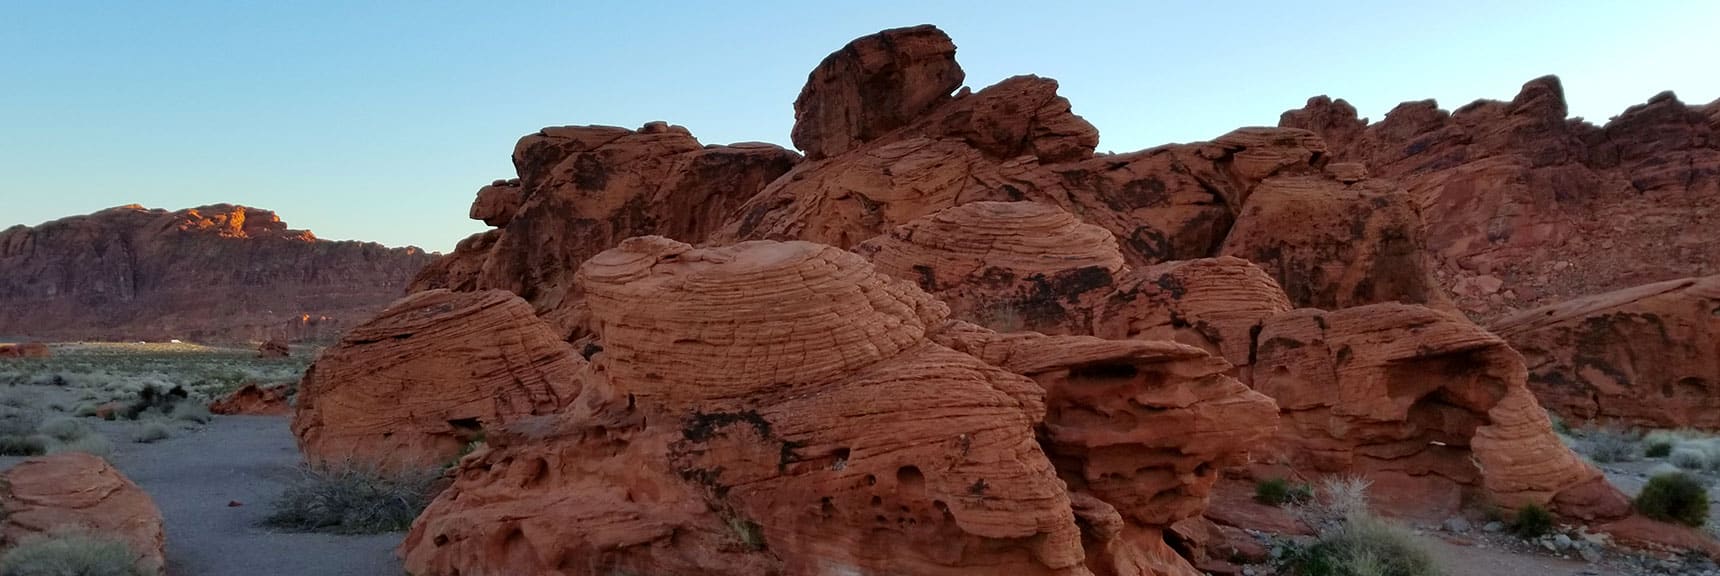 Bee Hive Rock Formations in Valley of Fire State Park, Nevada